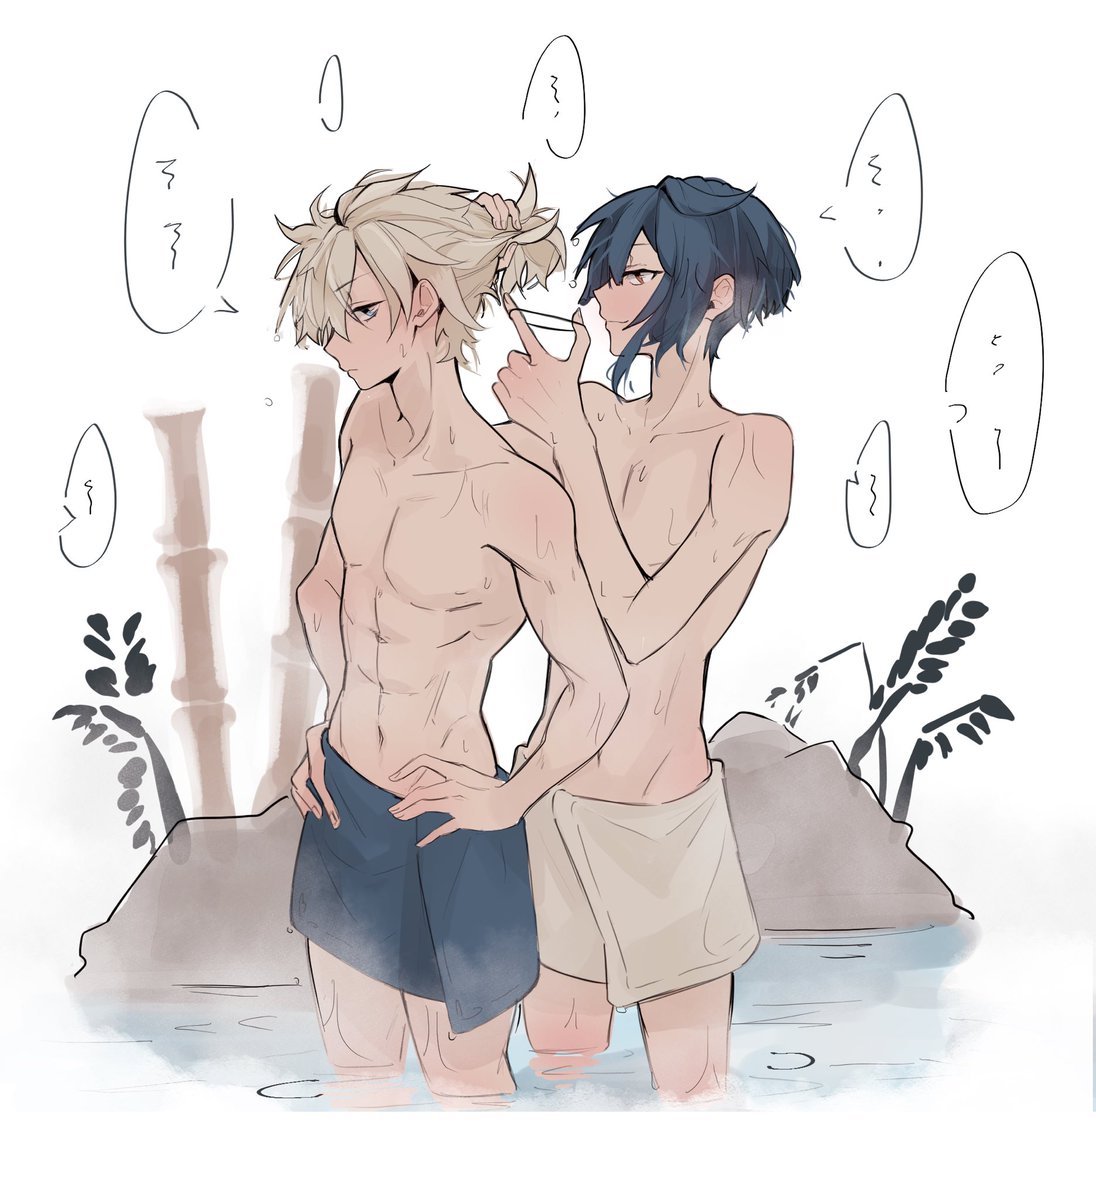 Sharing my headcanon that Albedo's and Xingqiu's favourite meeting spot for collaboration discussions are hot springs 🤭🤭

And Albedo's hair are so fluffy that no hair tie can hold them 🦁 